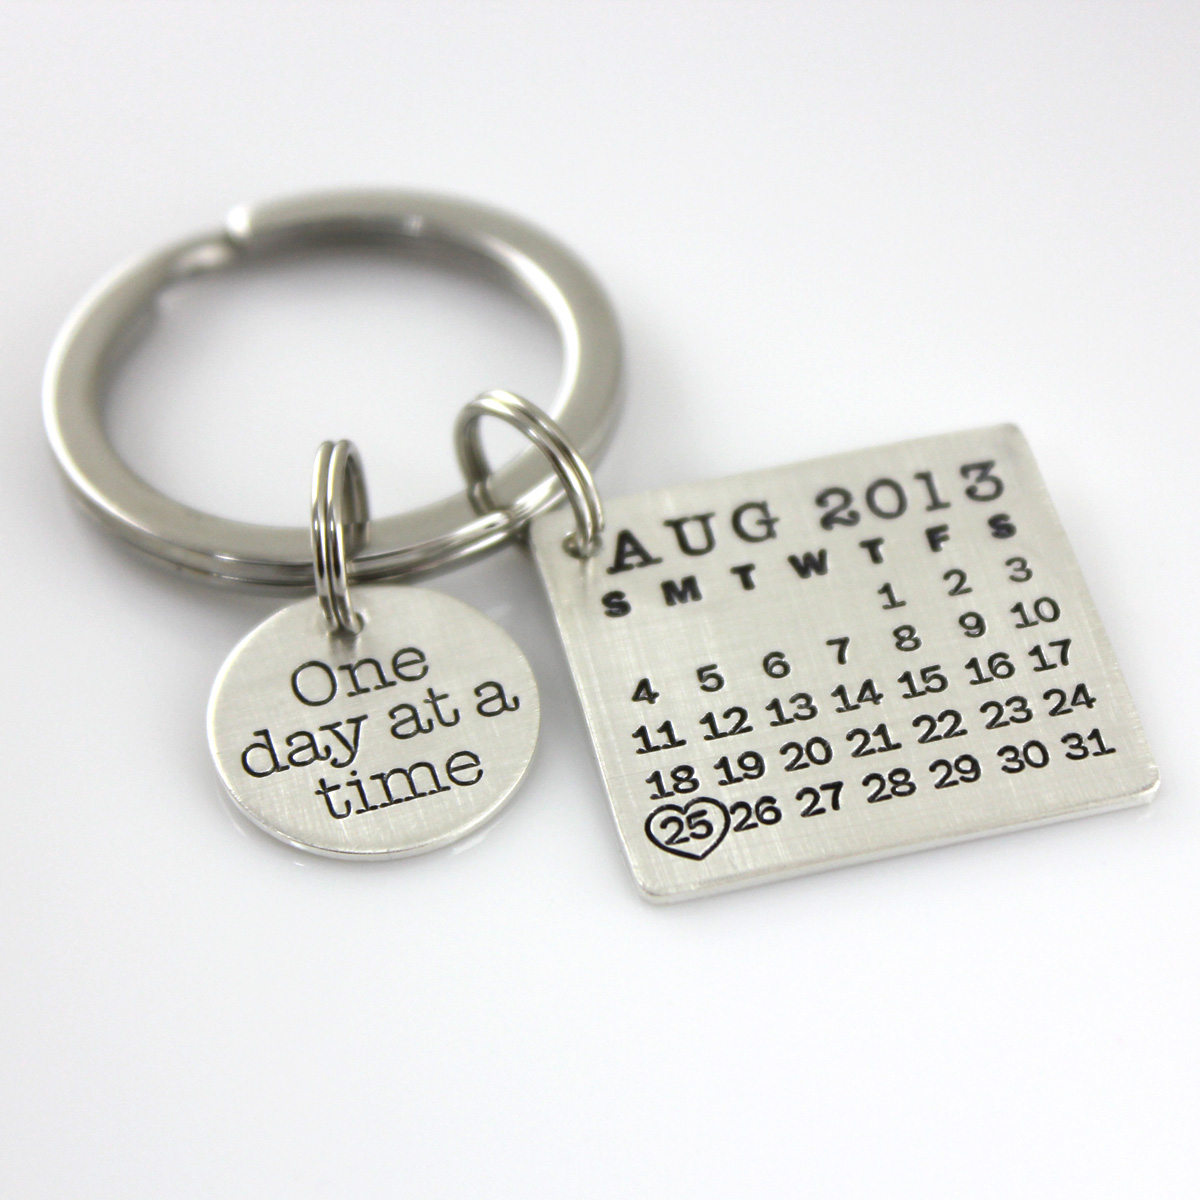 Mark Your Calendar Key Chain with 'One day at a time' Charm